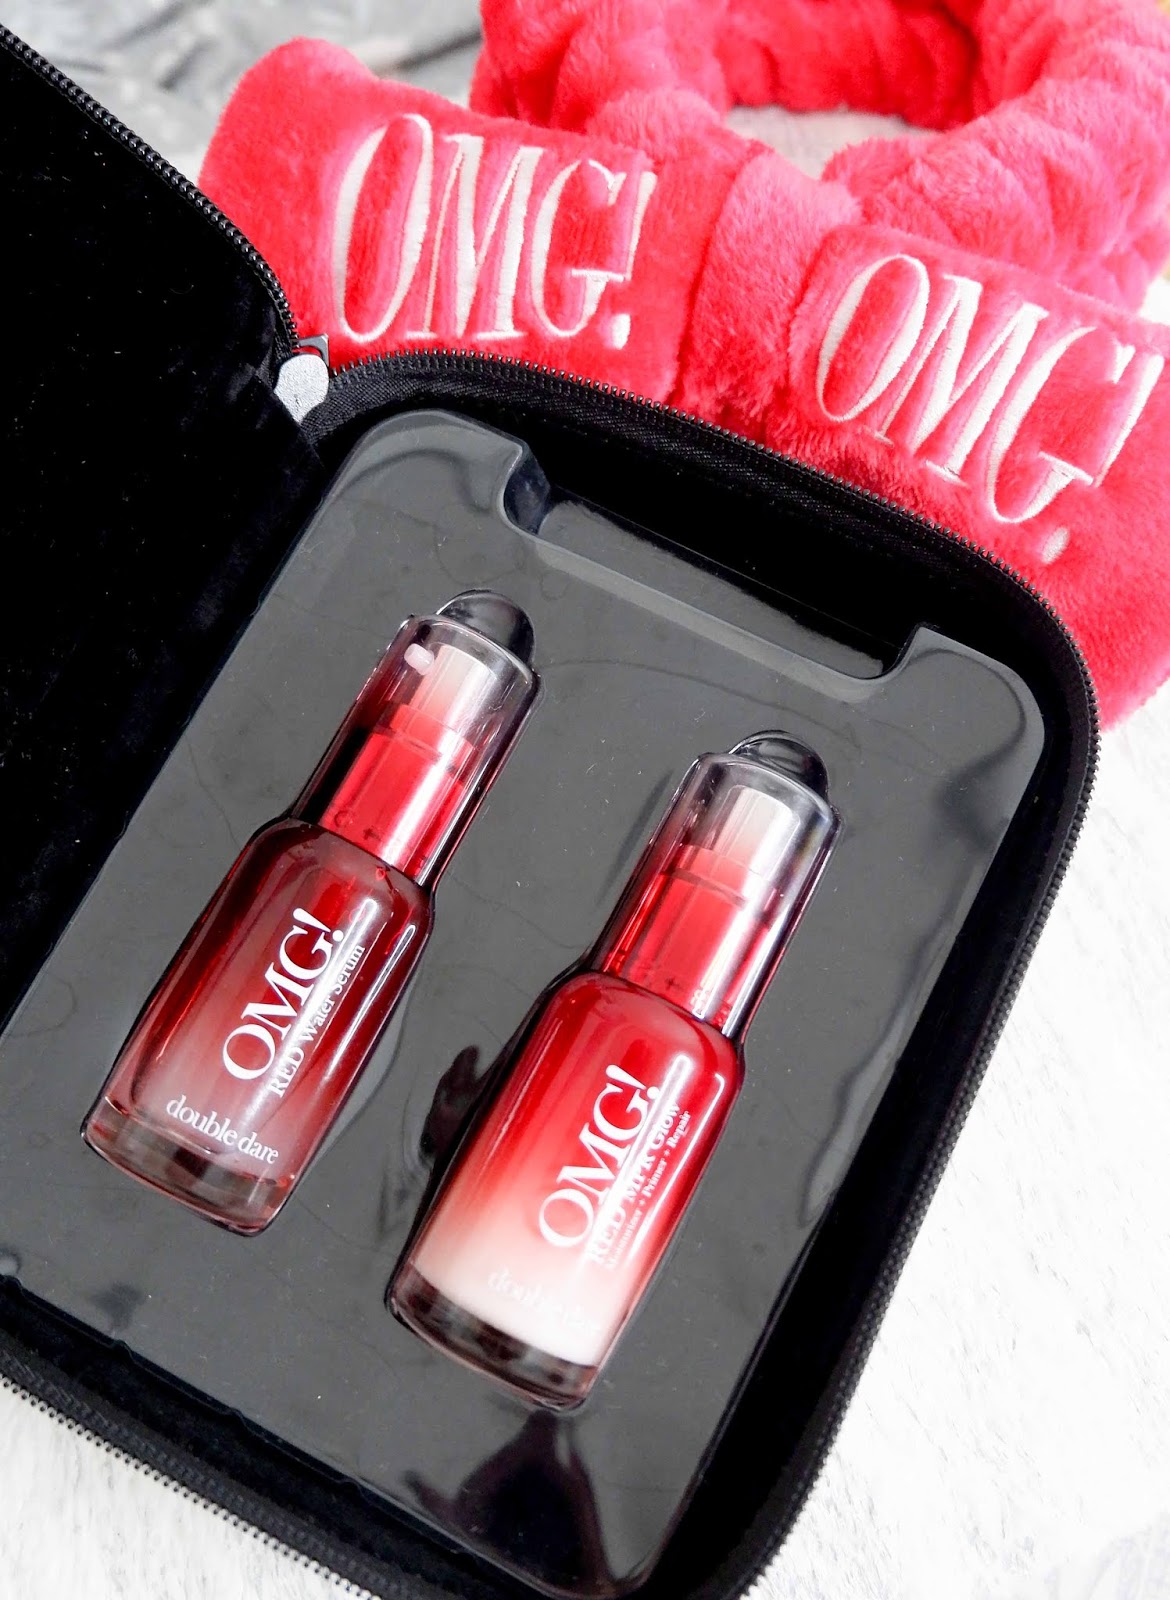 DOUBLE DARE: OMG! RED WATER SERUM AND RED MPR GLOW REVIEW